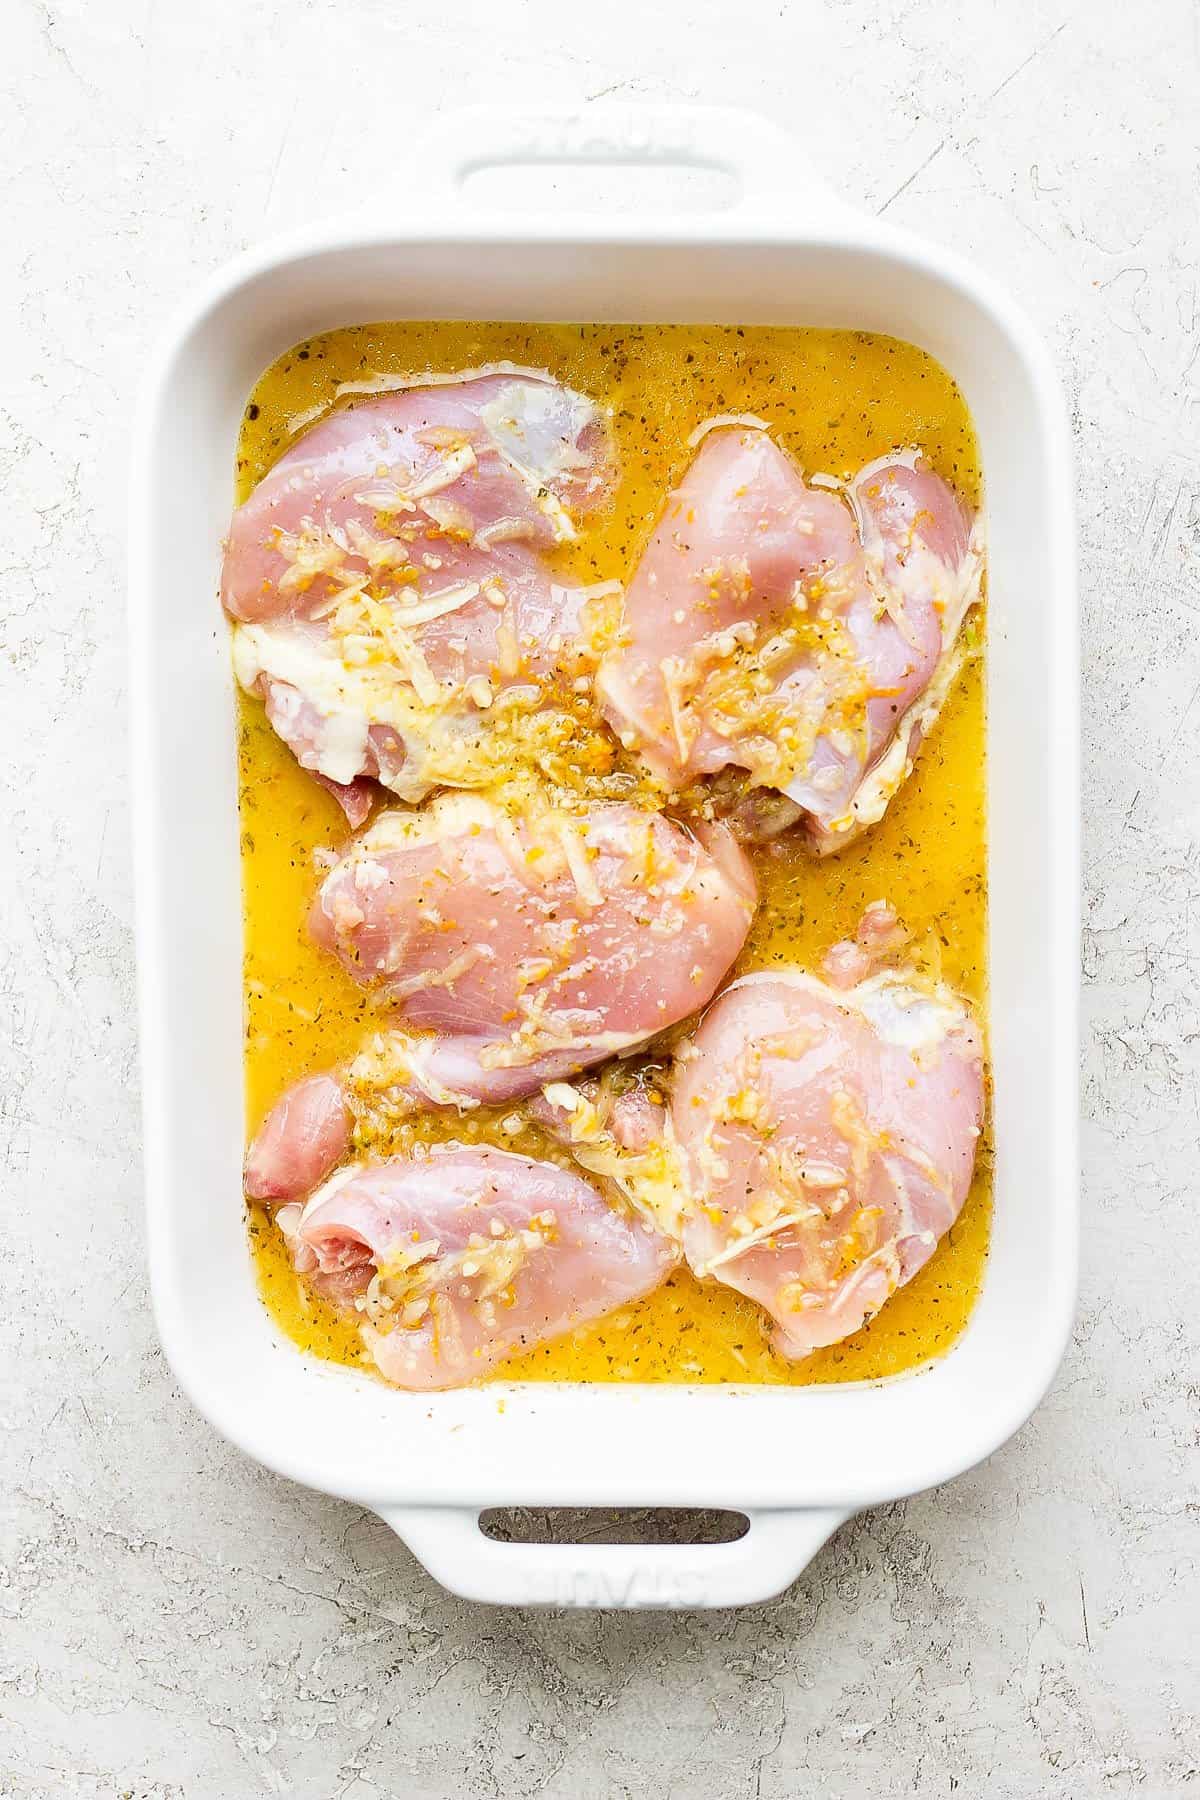 Mojo marinade poured over chicken thighs in a white baking dish.